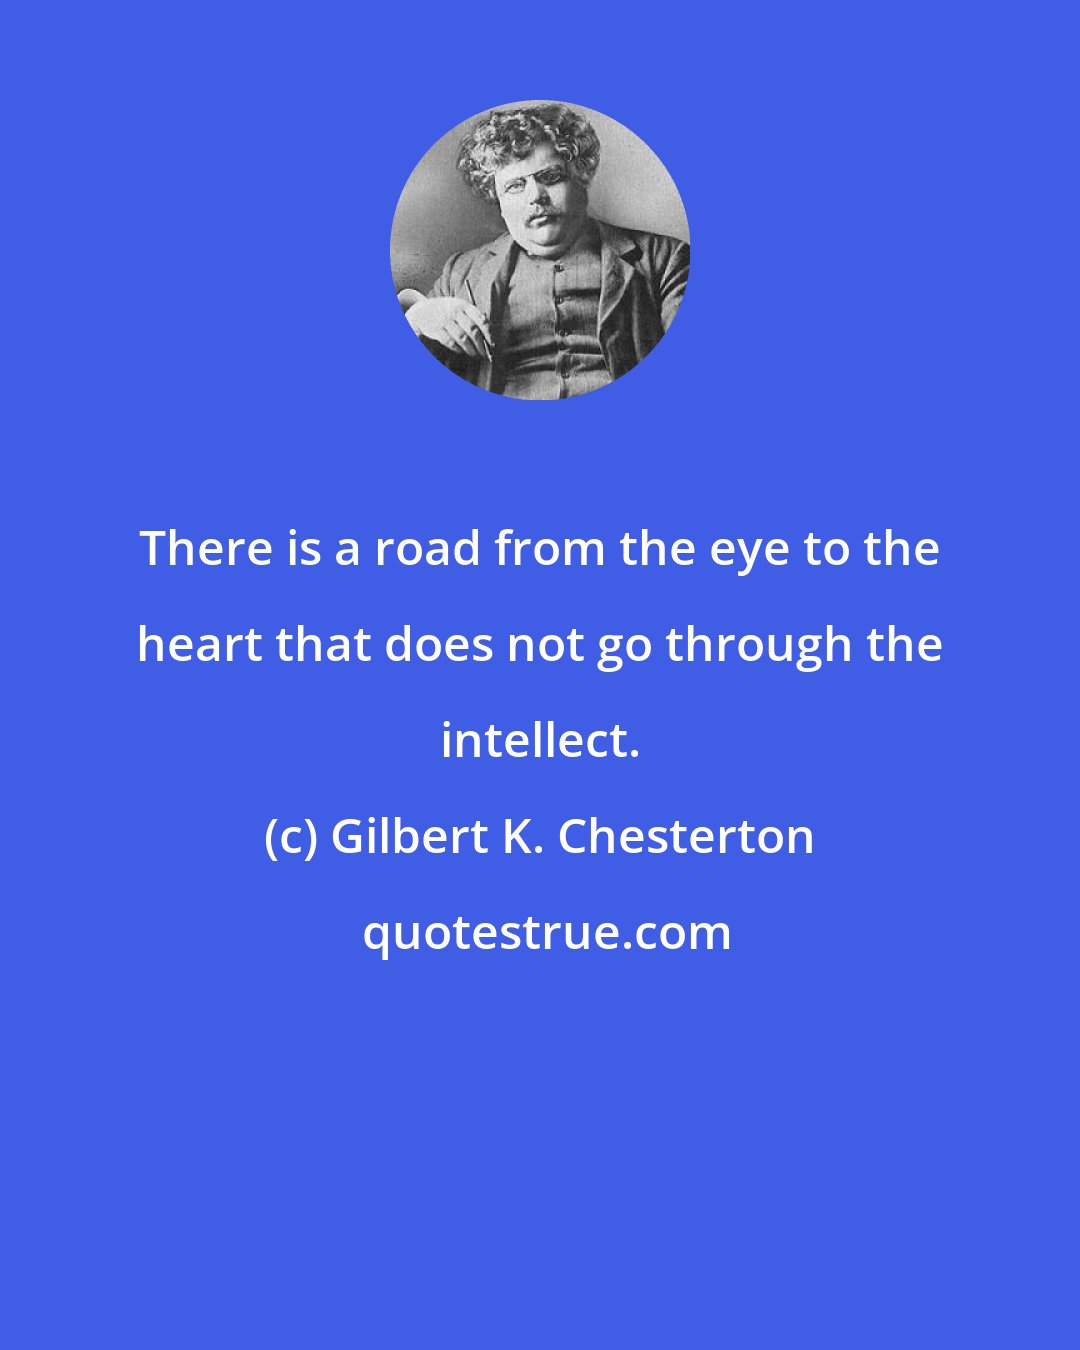 Gilbert K. Chesterton: There is a road from the eye to the heart that does not go through the intellect.